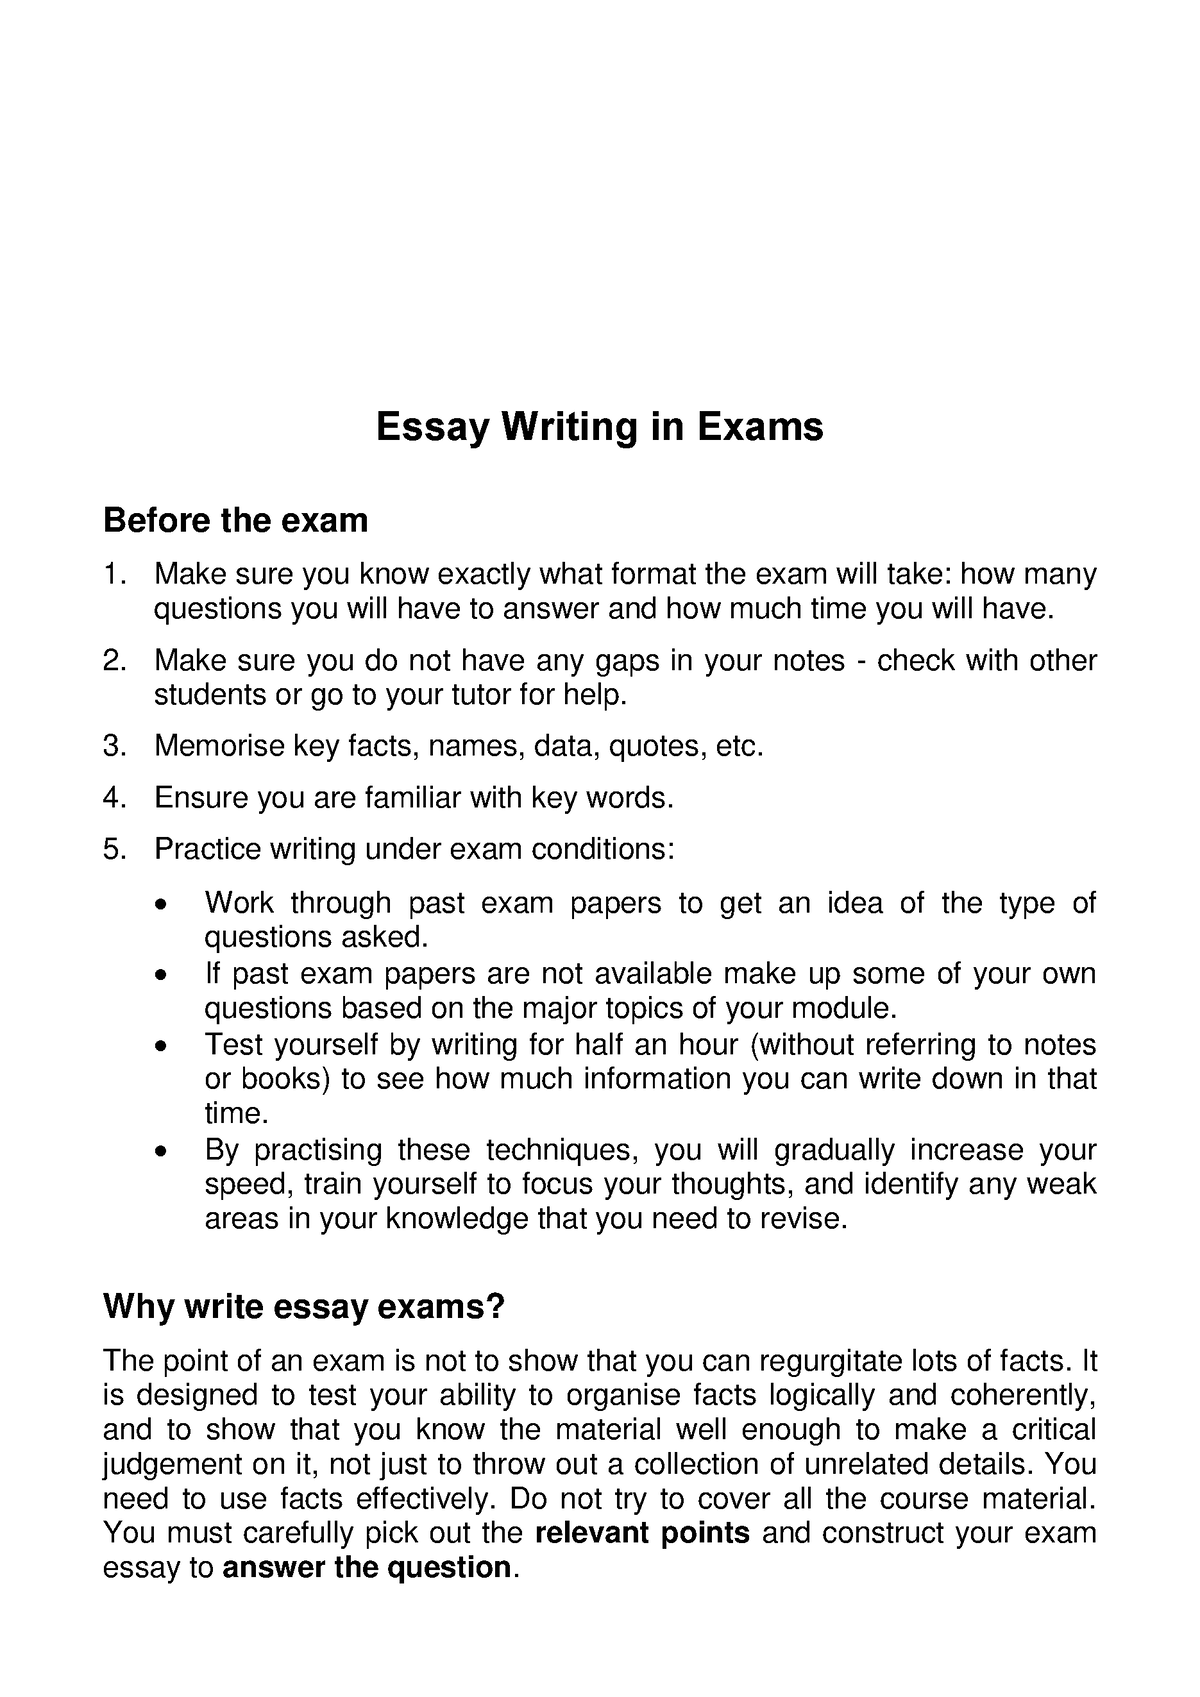 essay on exams in english